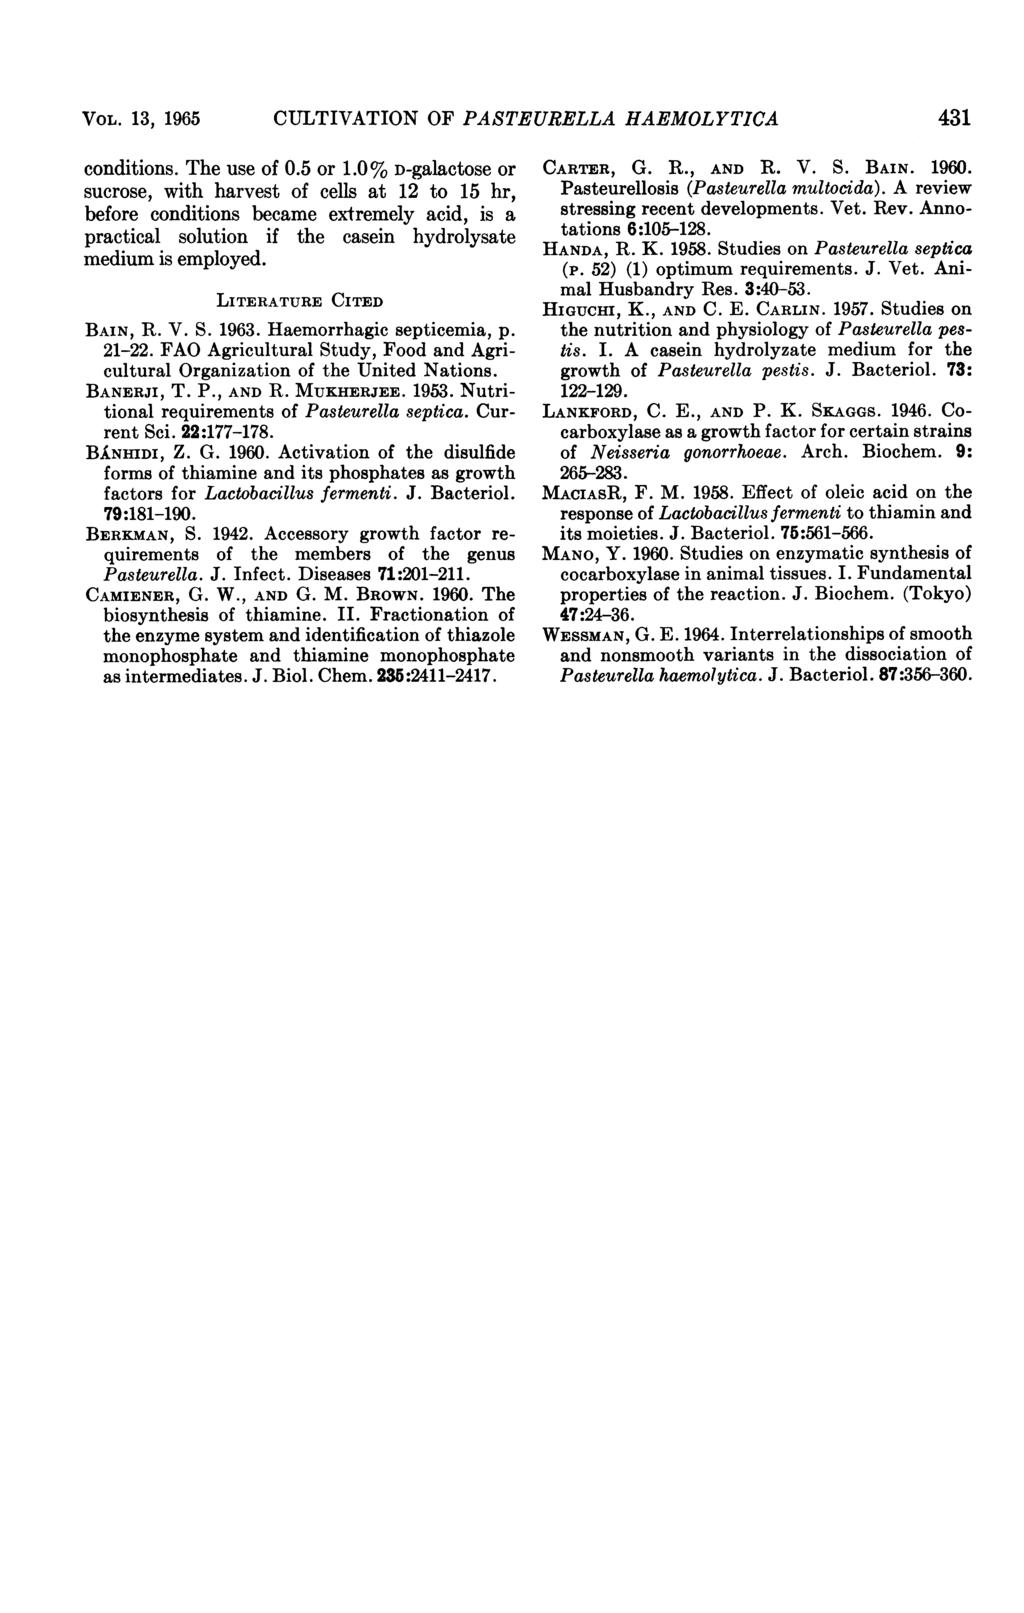 VOL. 13, 1965 CULTIVATION OF PASTEURELLA HAEMOLYTICA 431 conditions. The use of 0.5 or 1.